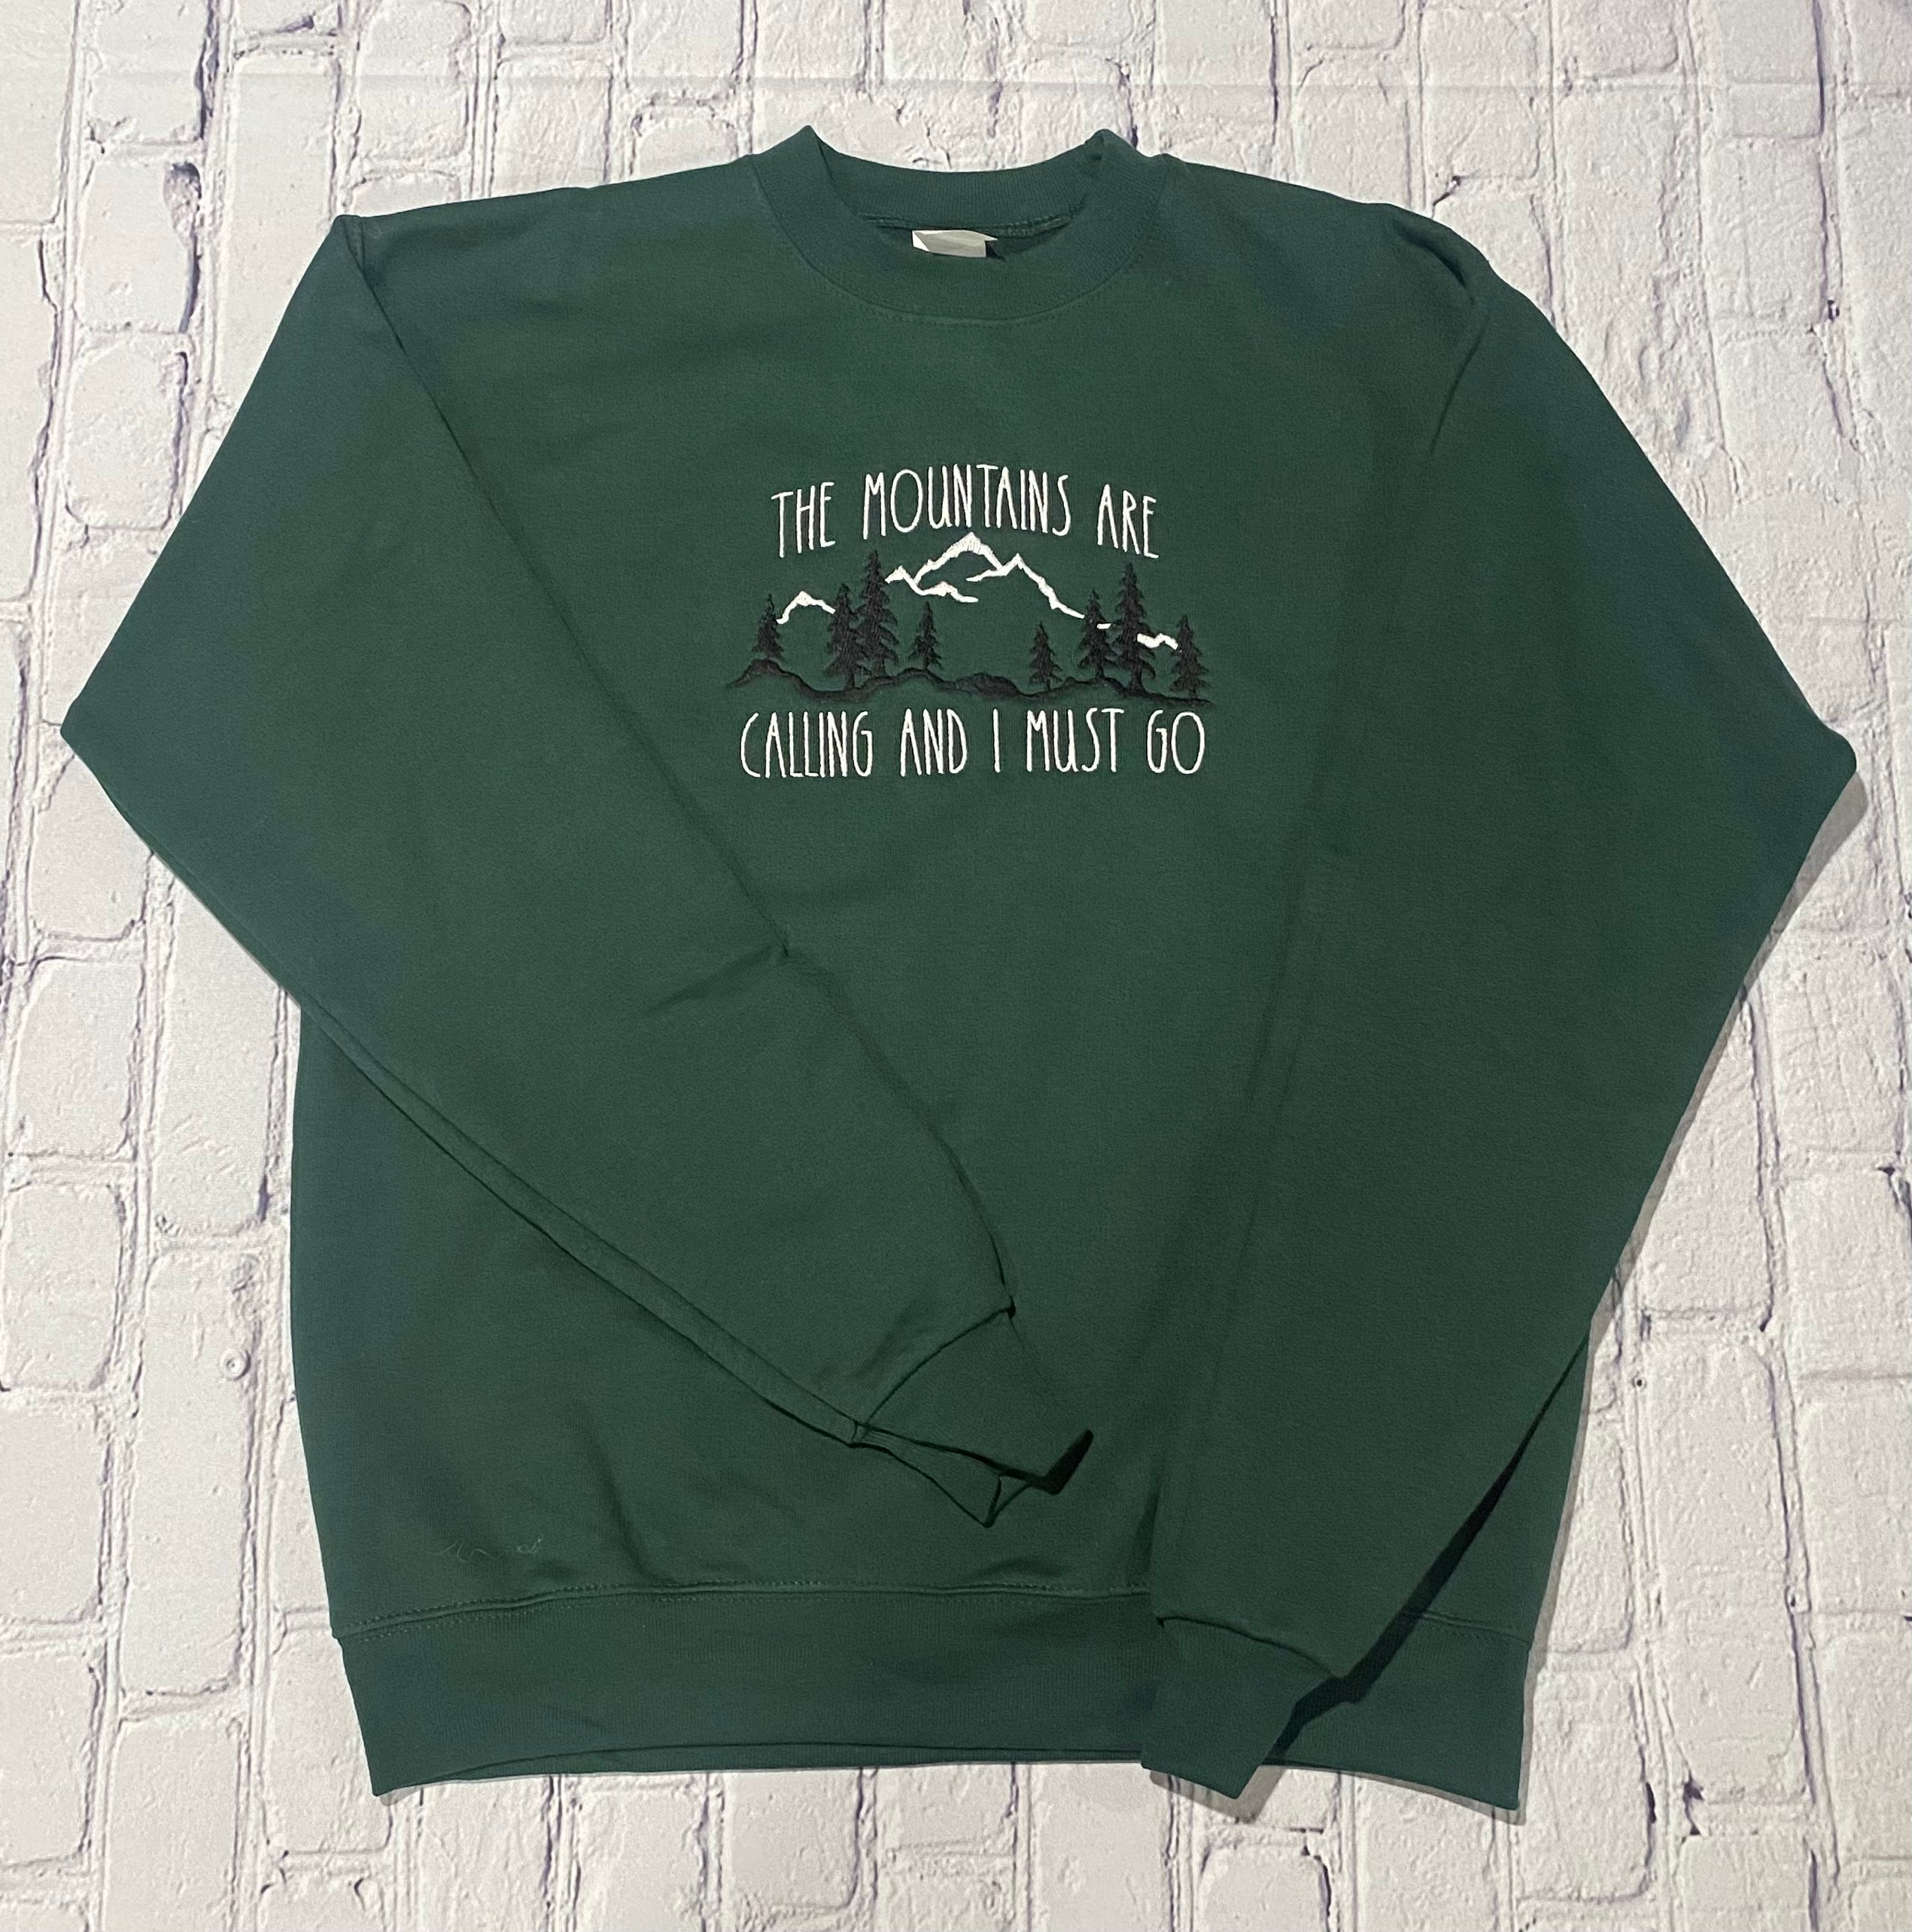 Details about   Trendy The Mountains Are Calling And I Must Go Hanes Unisex Crewneck Sweatshirt 